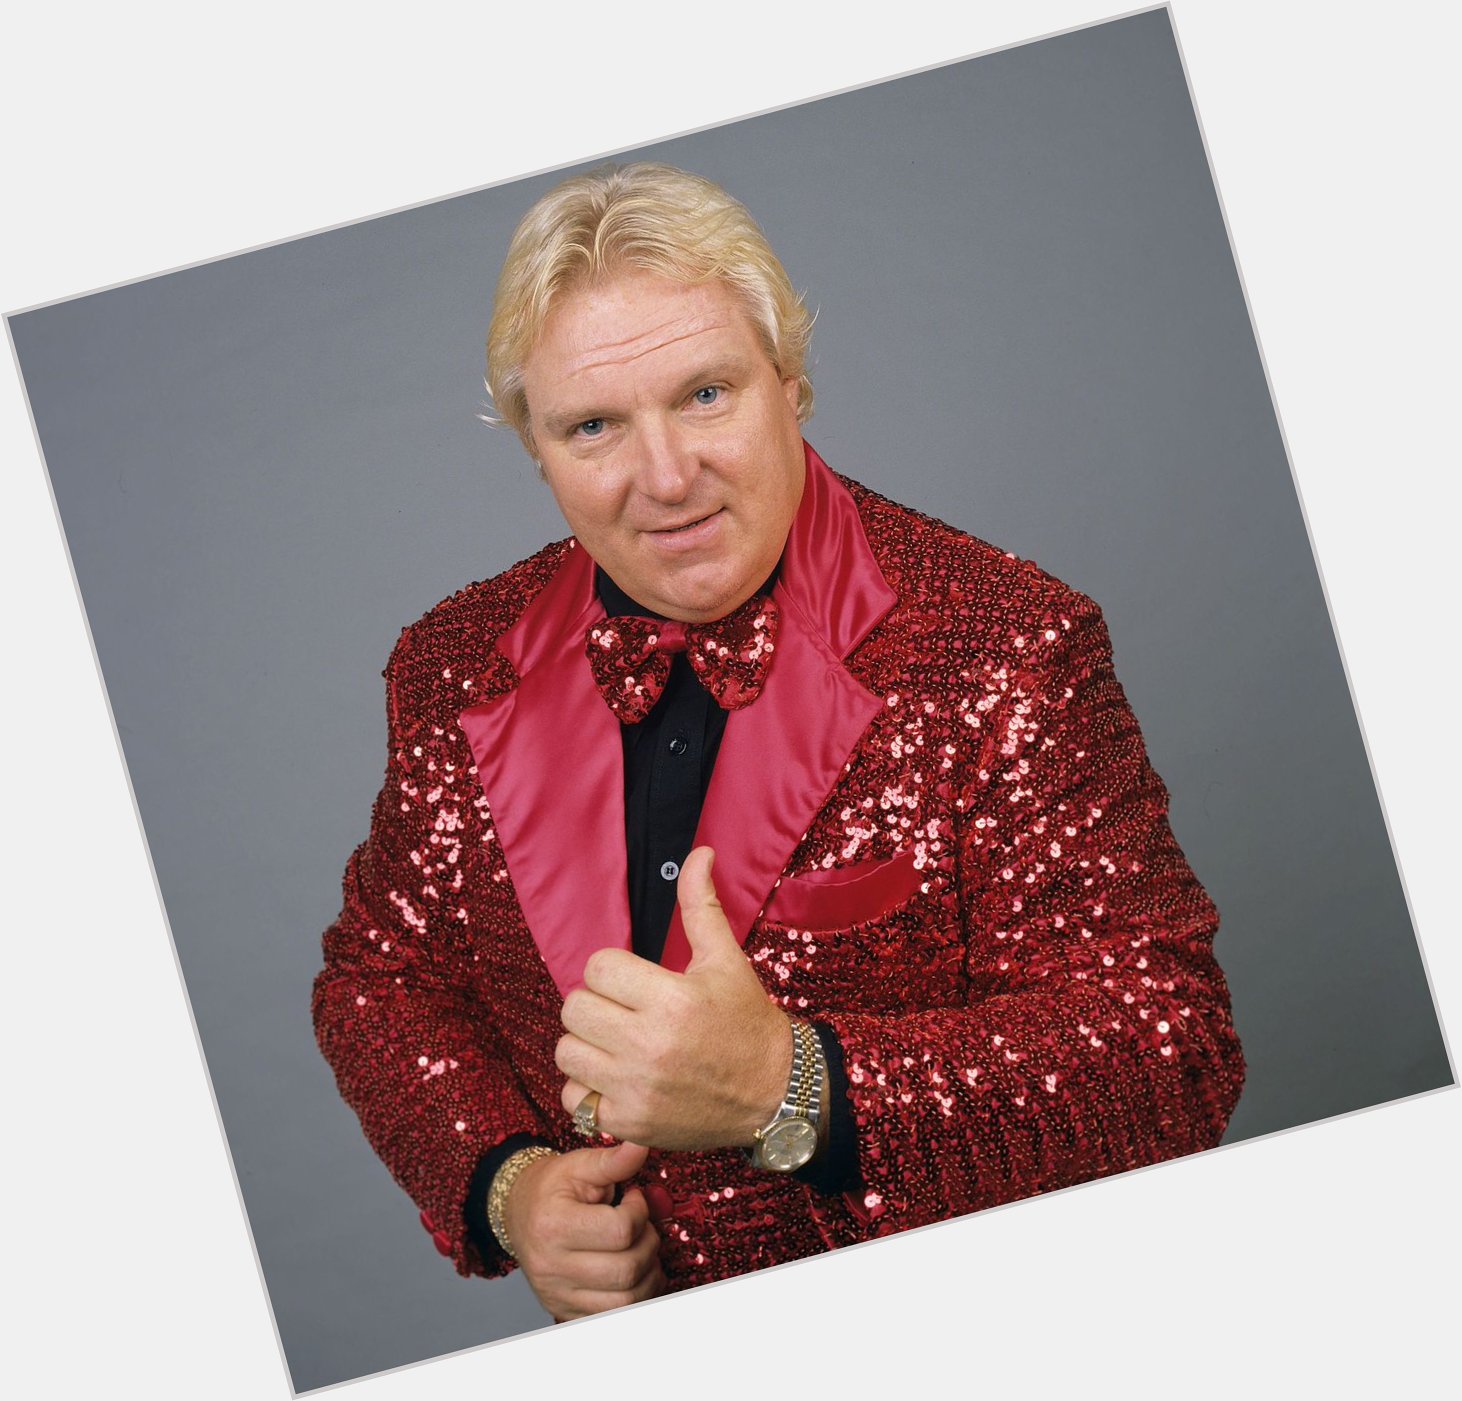 He would have the podcast in the world if he was alive today. Happy Birthday to the late great Bobby Heenan! 